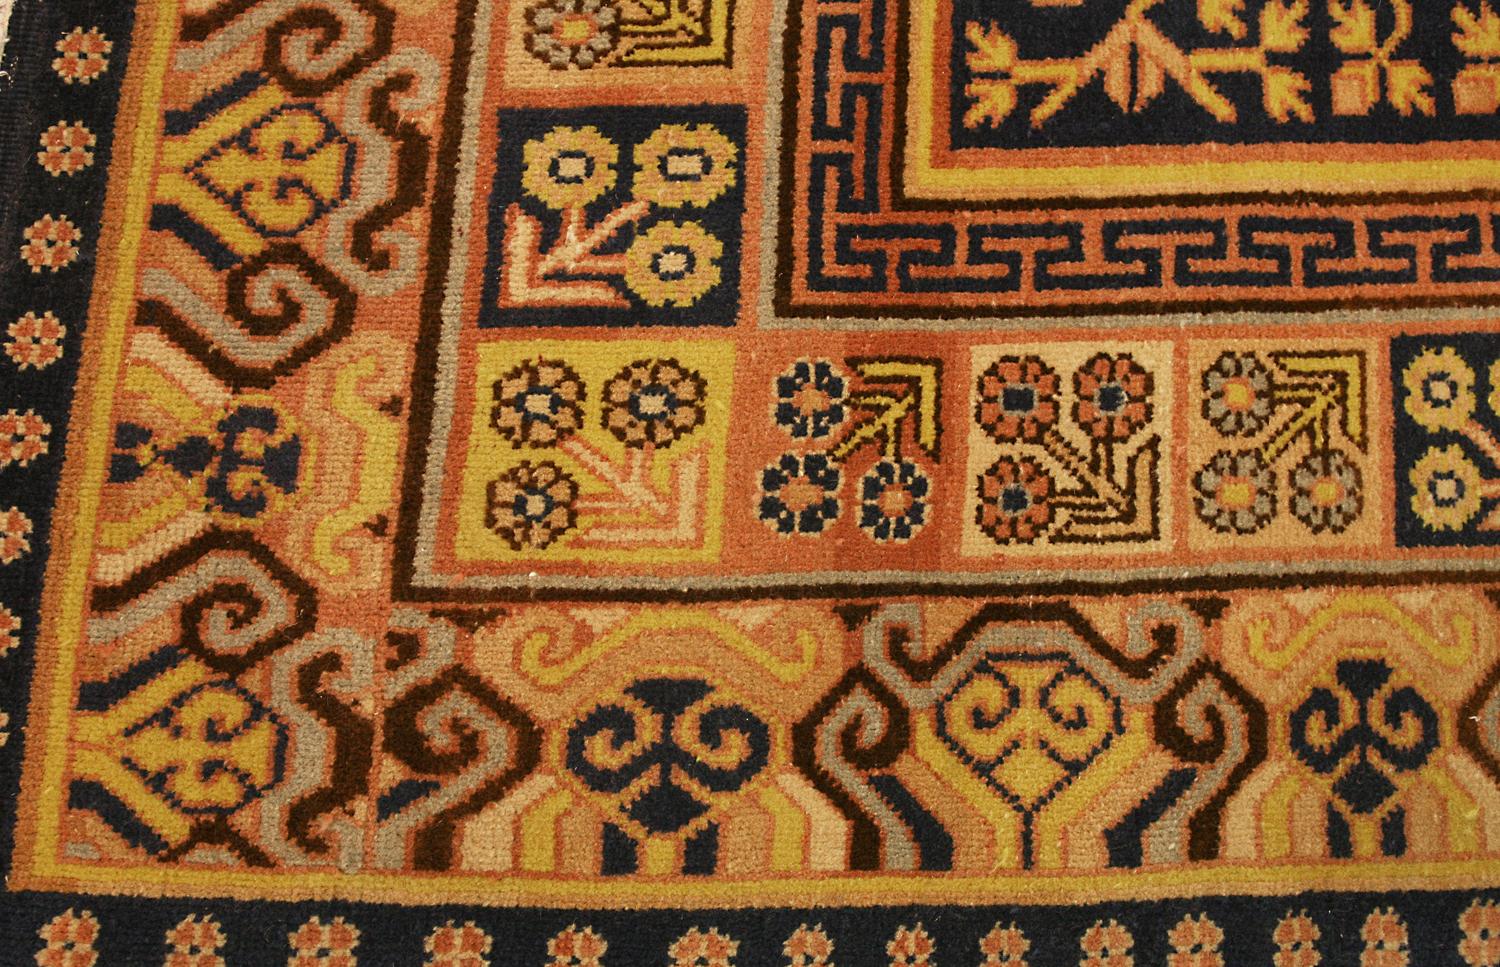 This is an antique Khotan rug woven in eastern Turkistan during the first quarter of the 20th century circa 1920's and measures 655 x 190 CM. At each end of the rug, there are two vases located in the main fields which give life to two pomegranate